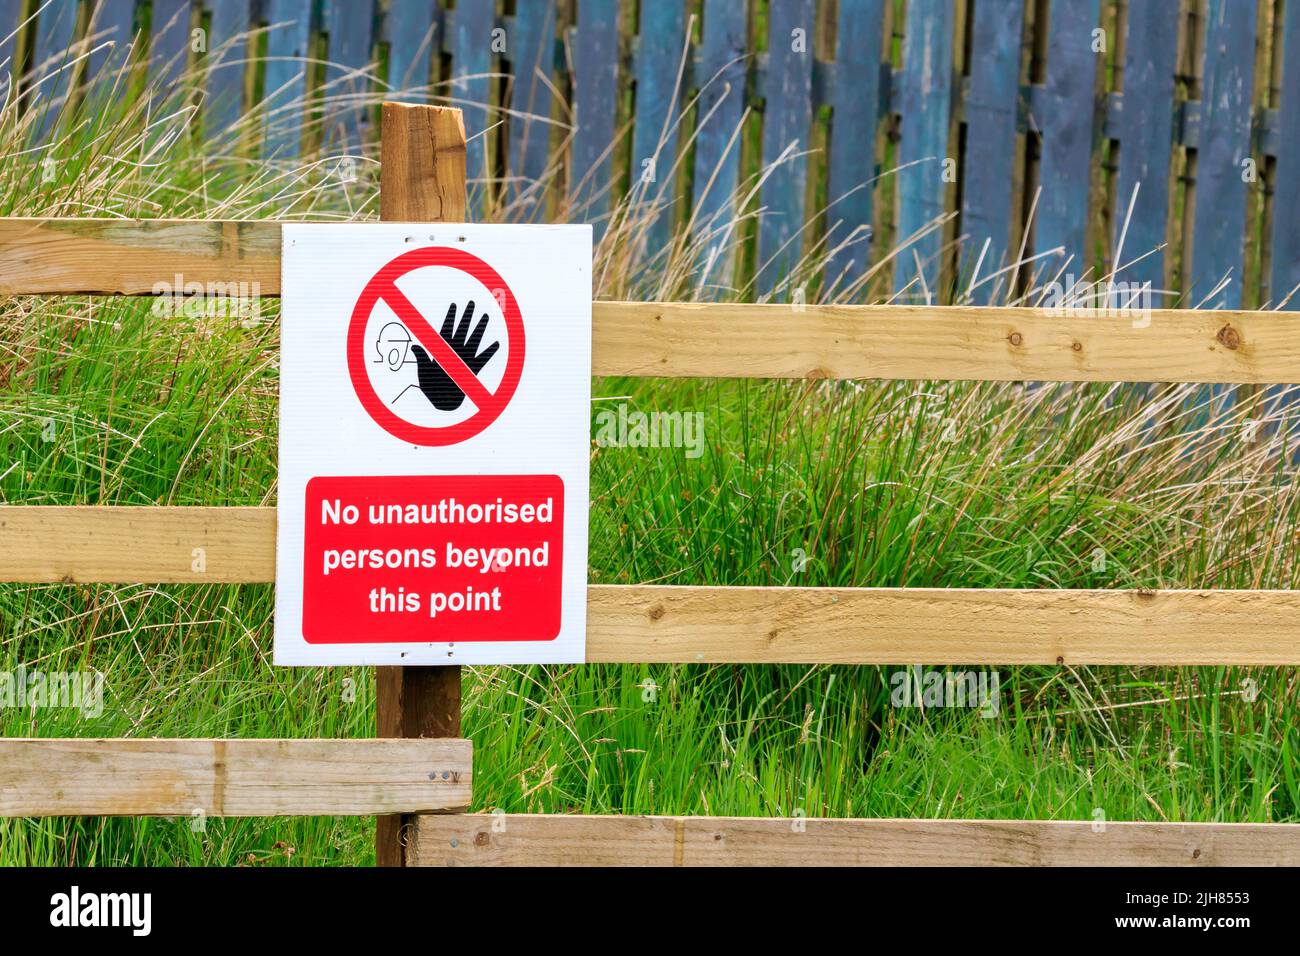 No unauthorised persons beyond this point sign fitted to a wooden fence Stock Photo